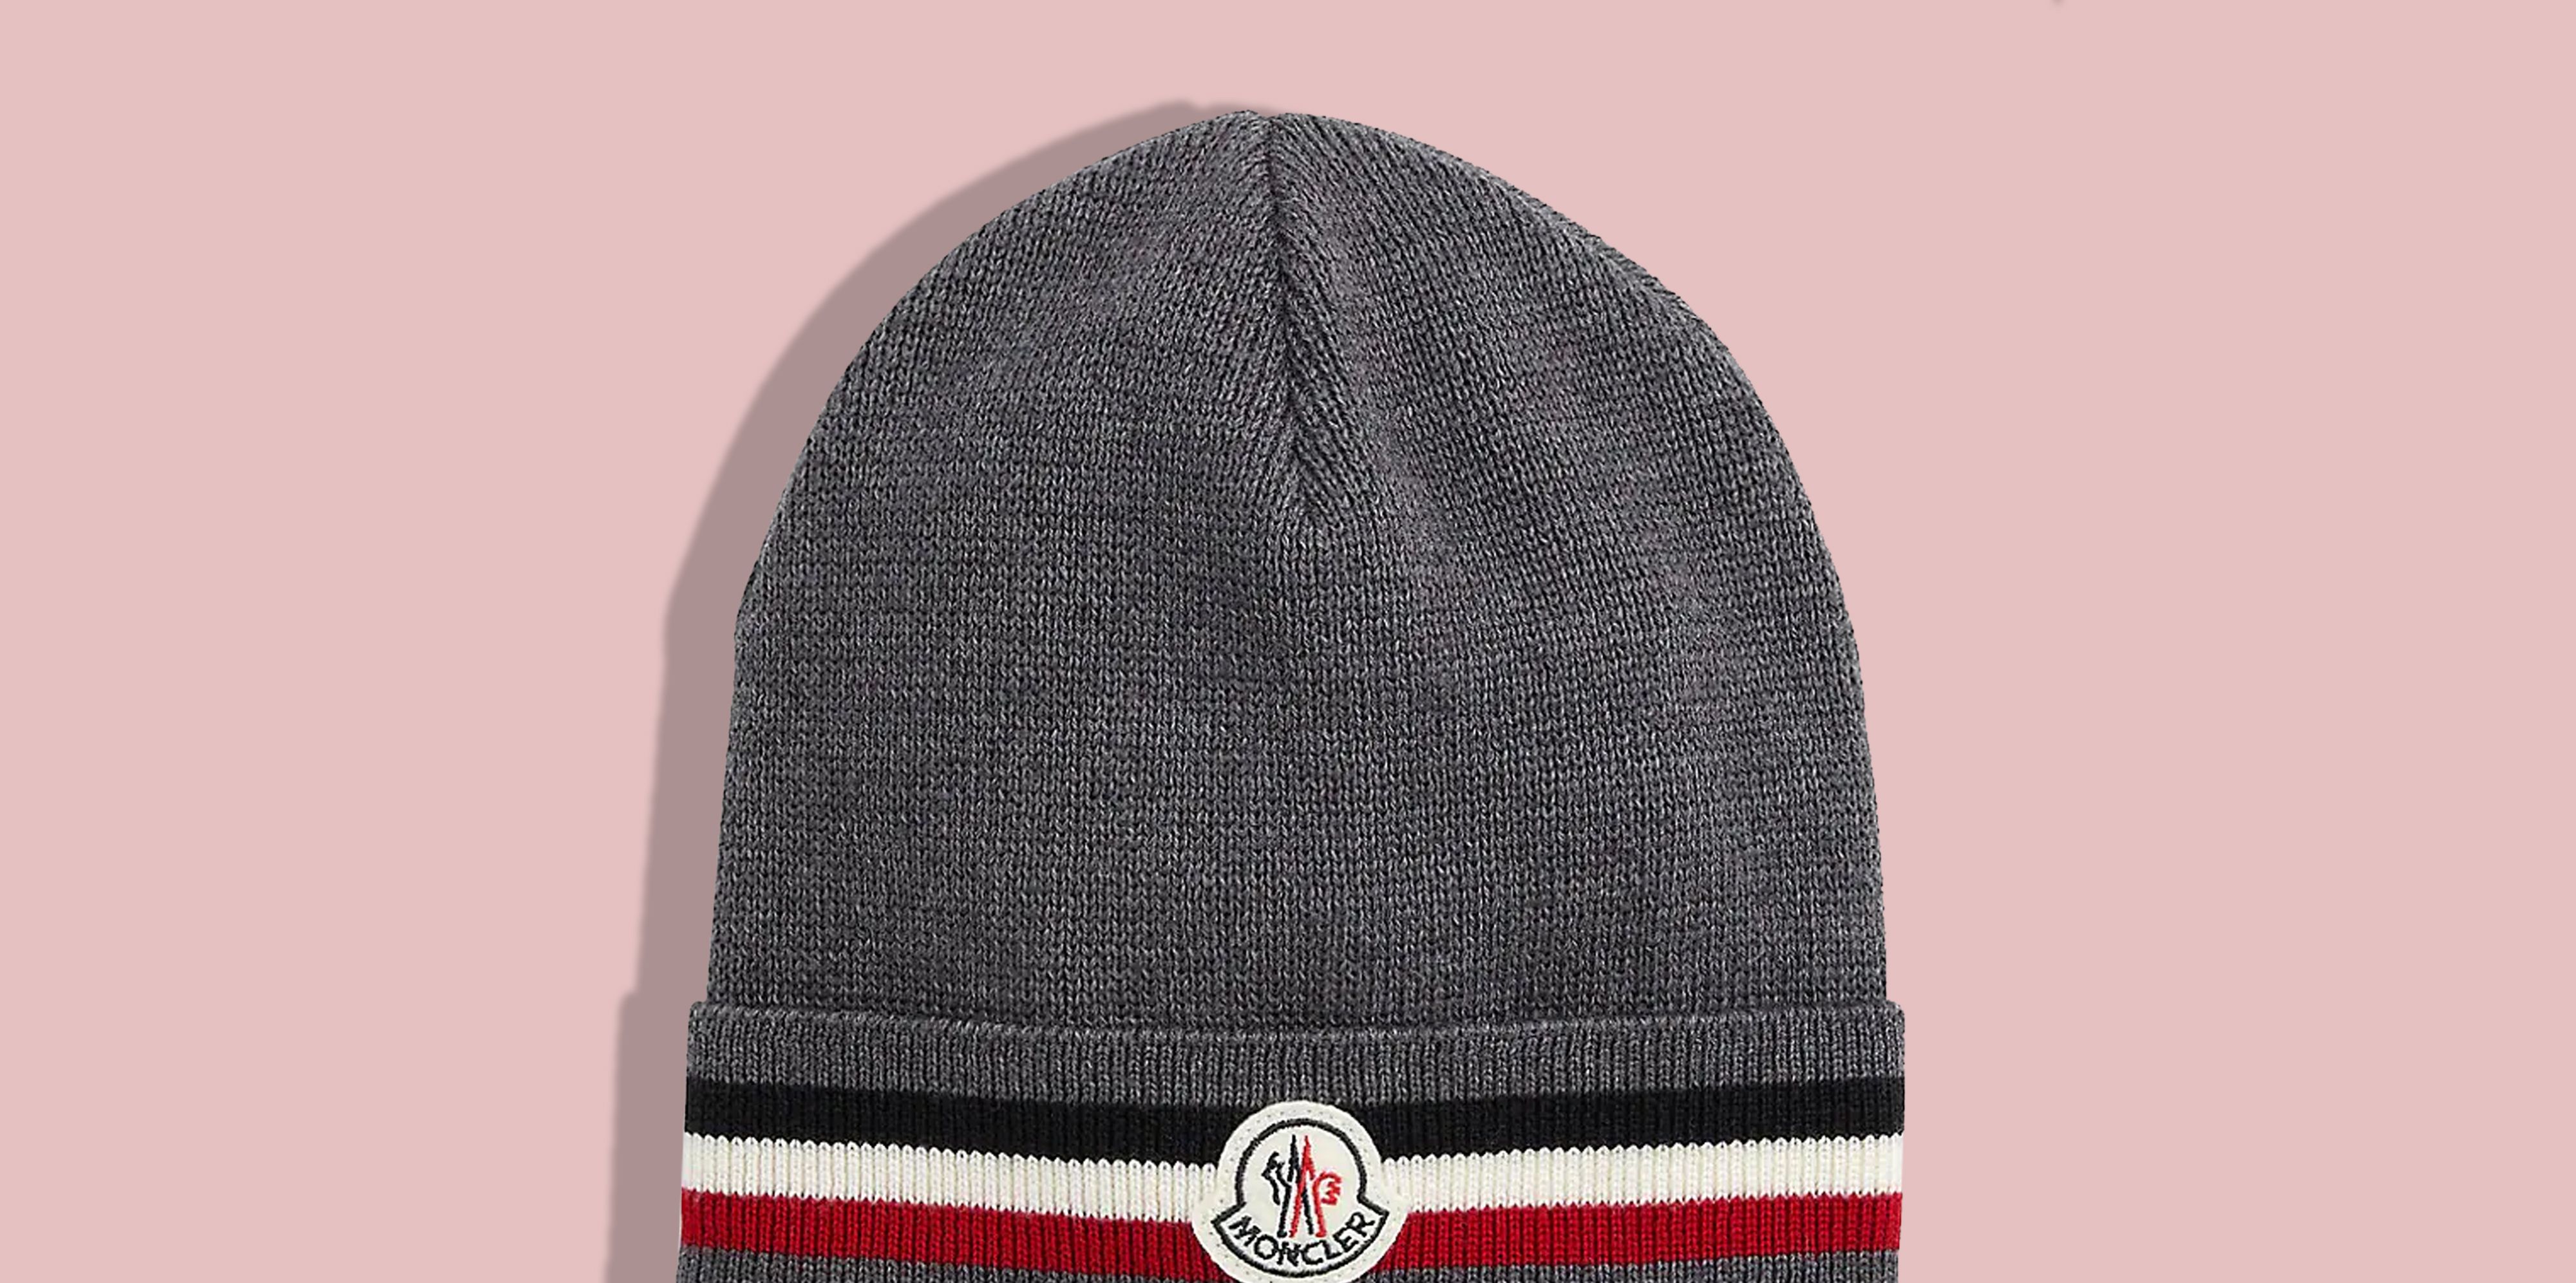 35 Best Beanies for Men in 2023 - Cool Beanies to Buy